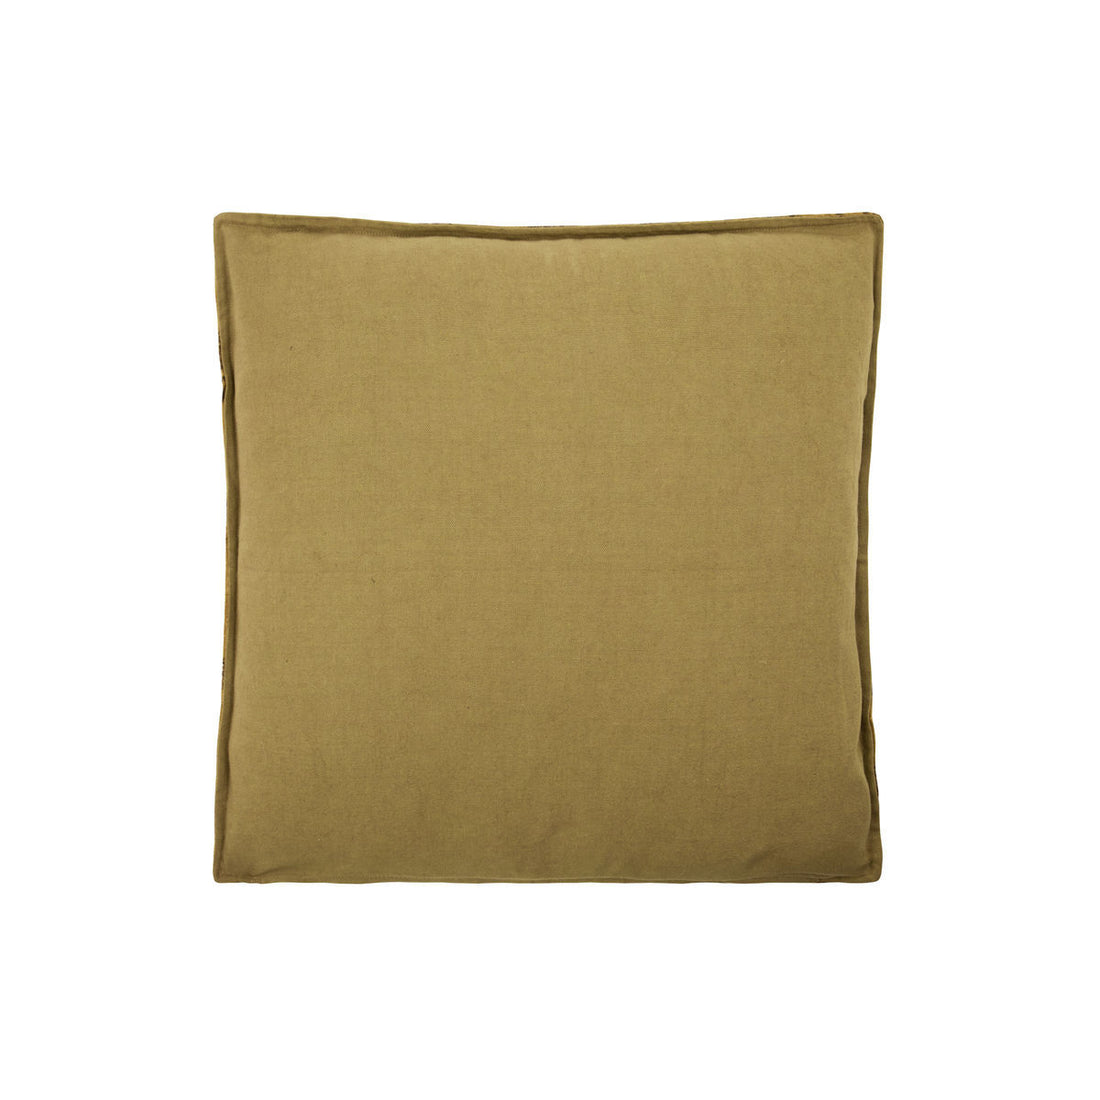 House Doctor Pillow Covers, Hdbetto, Golden